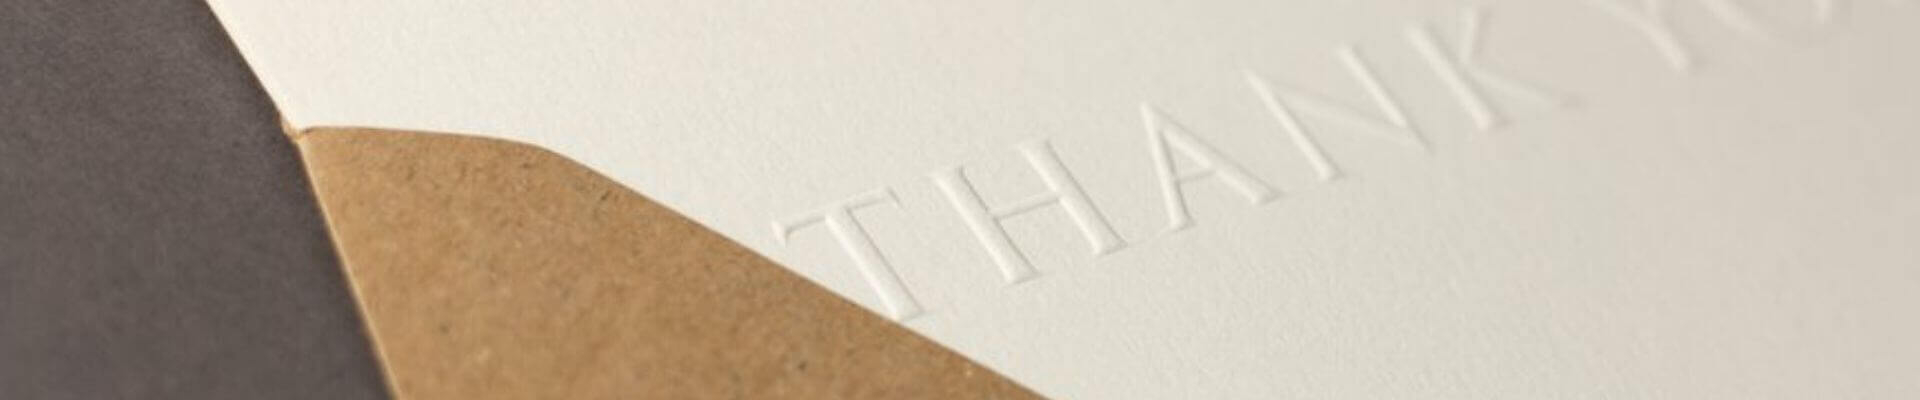 Personalisation - Process - Embossing